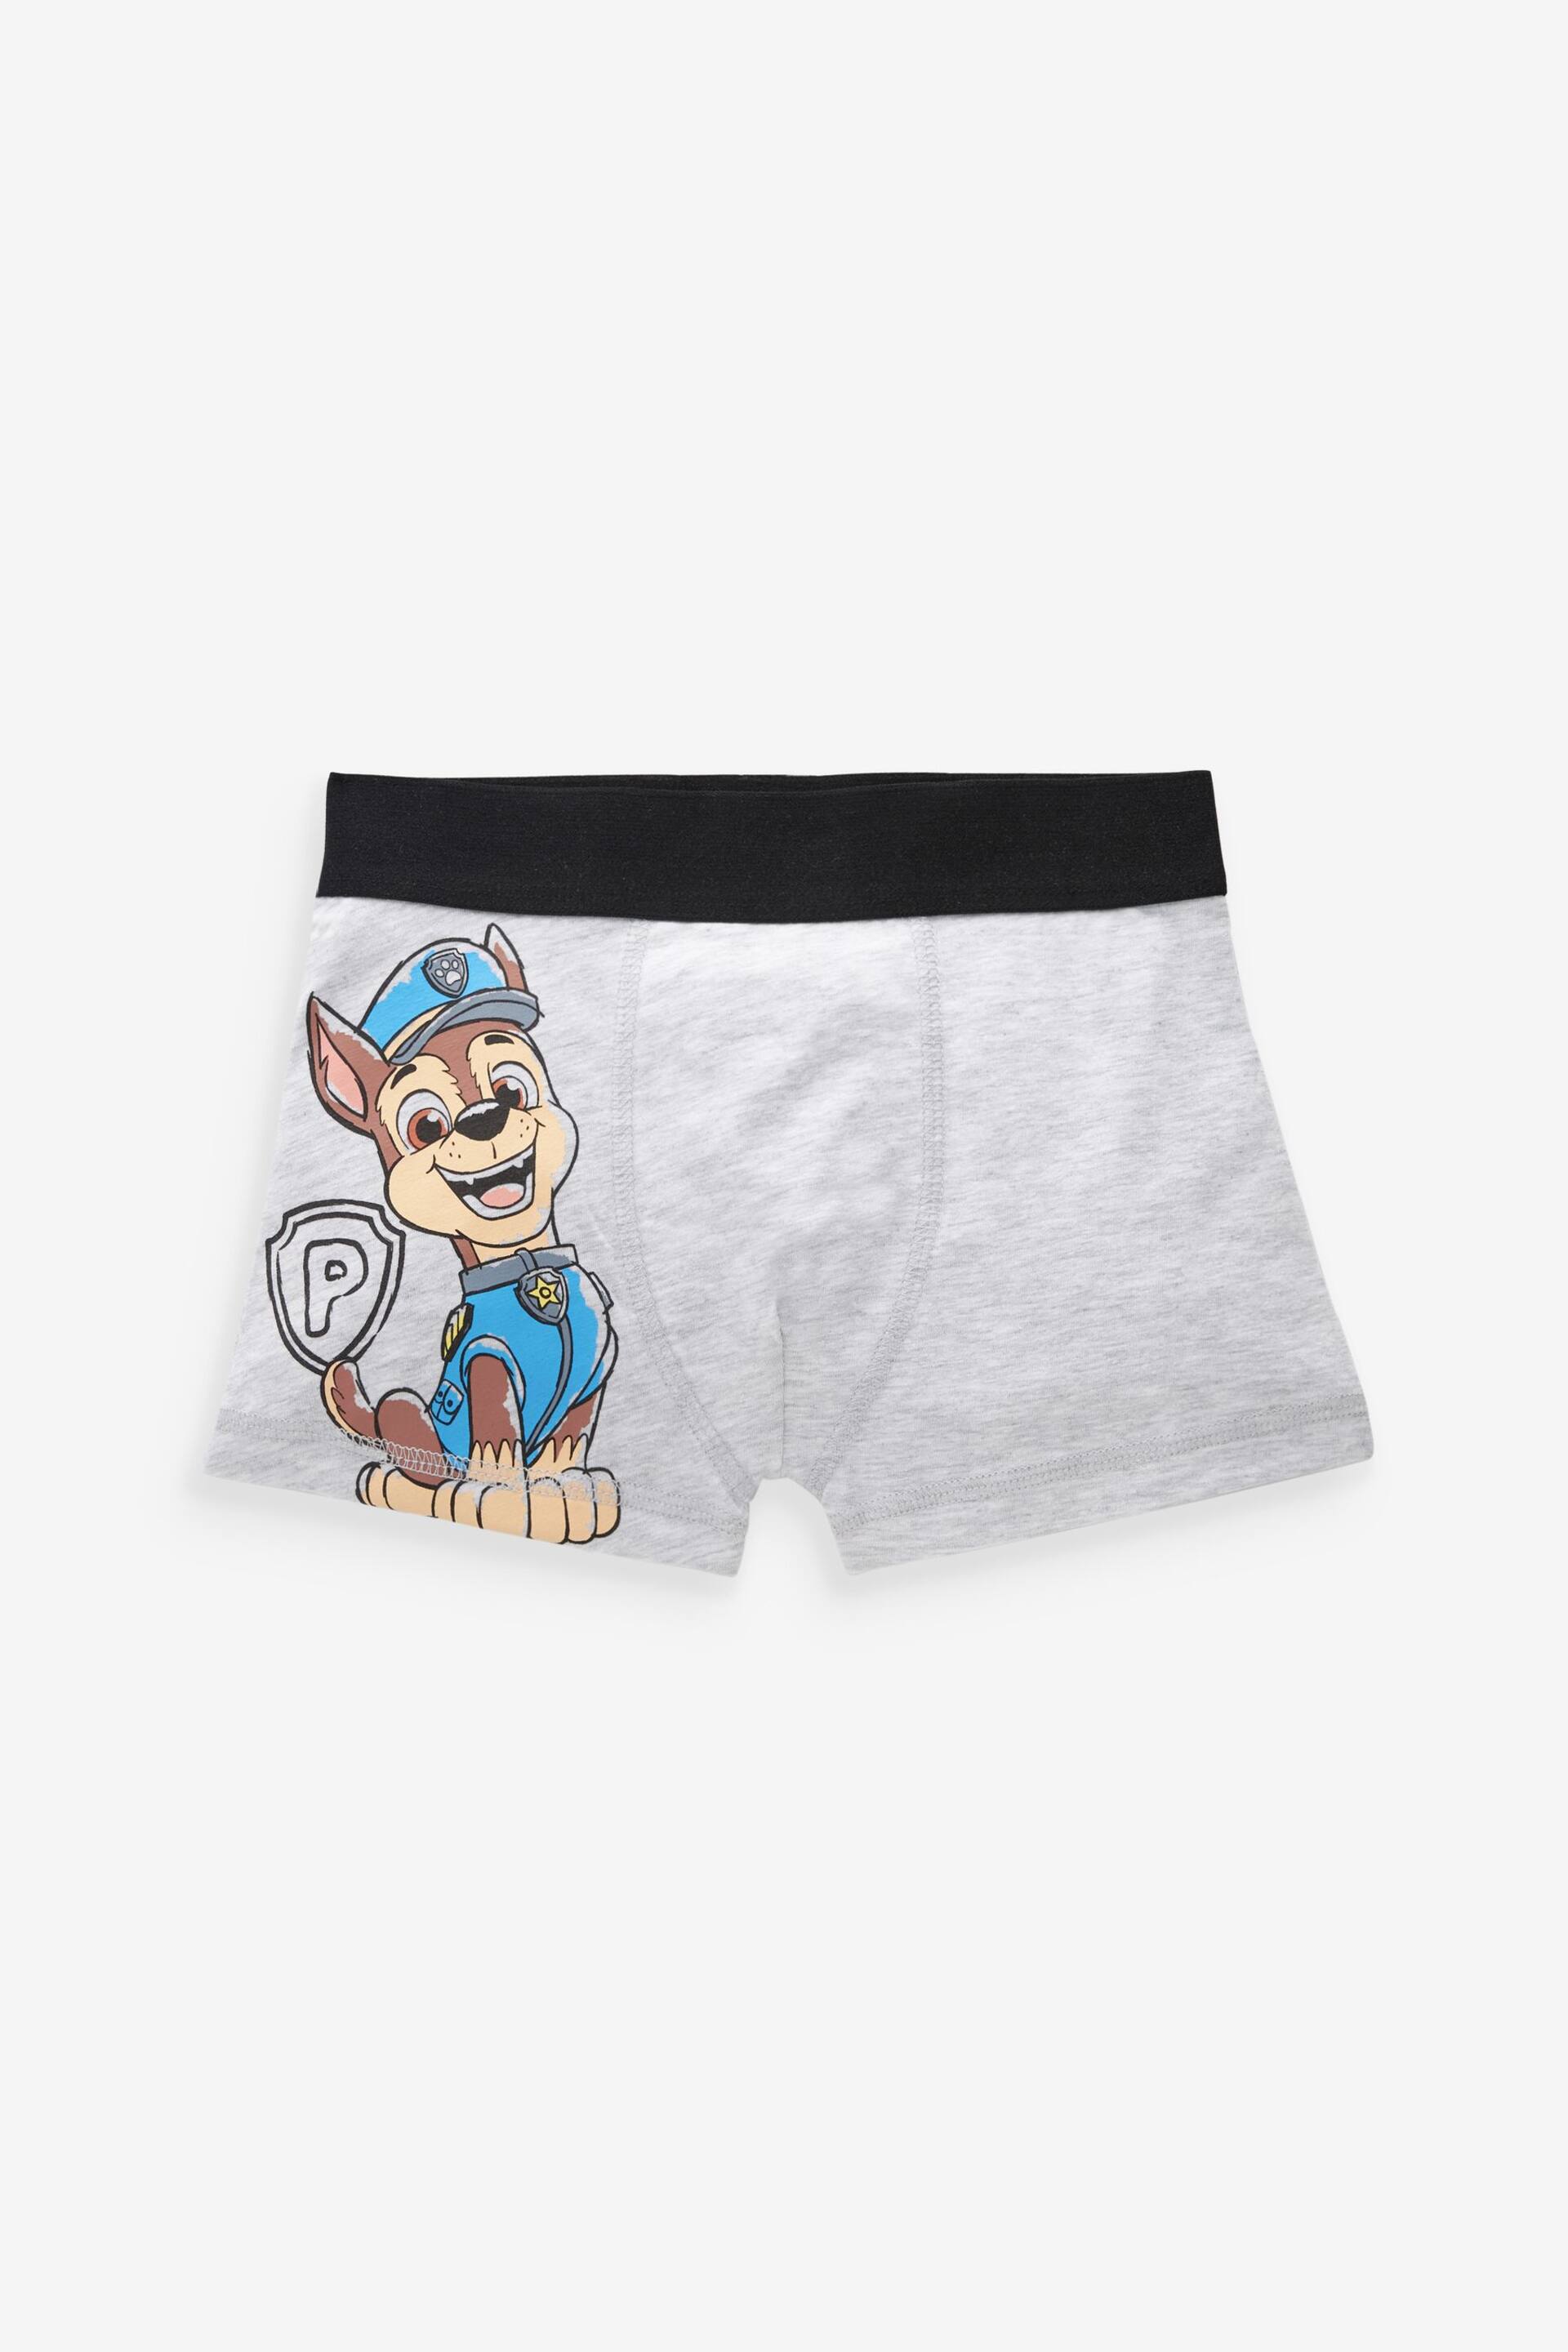 PAW Patrol License Trunks 3 Pack (1.5-14yrs) - Image 4 of 7